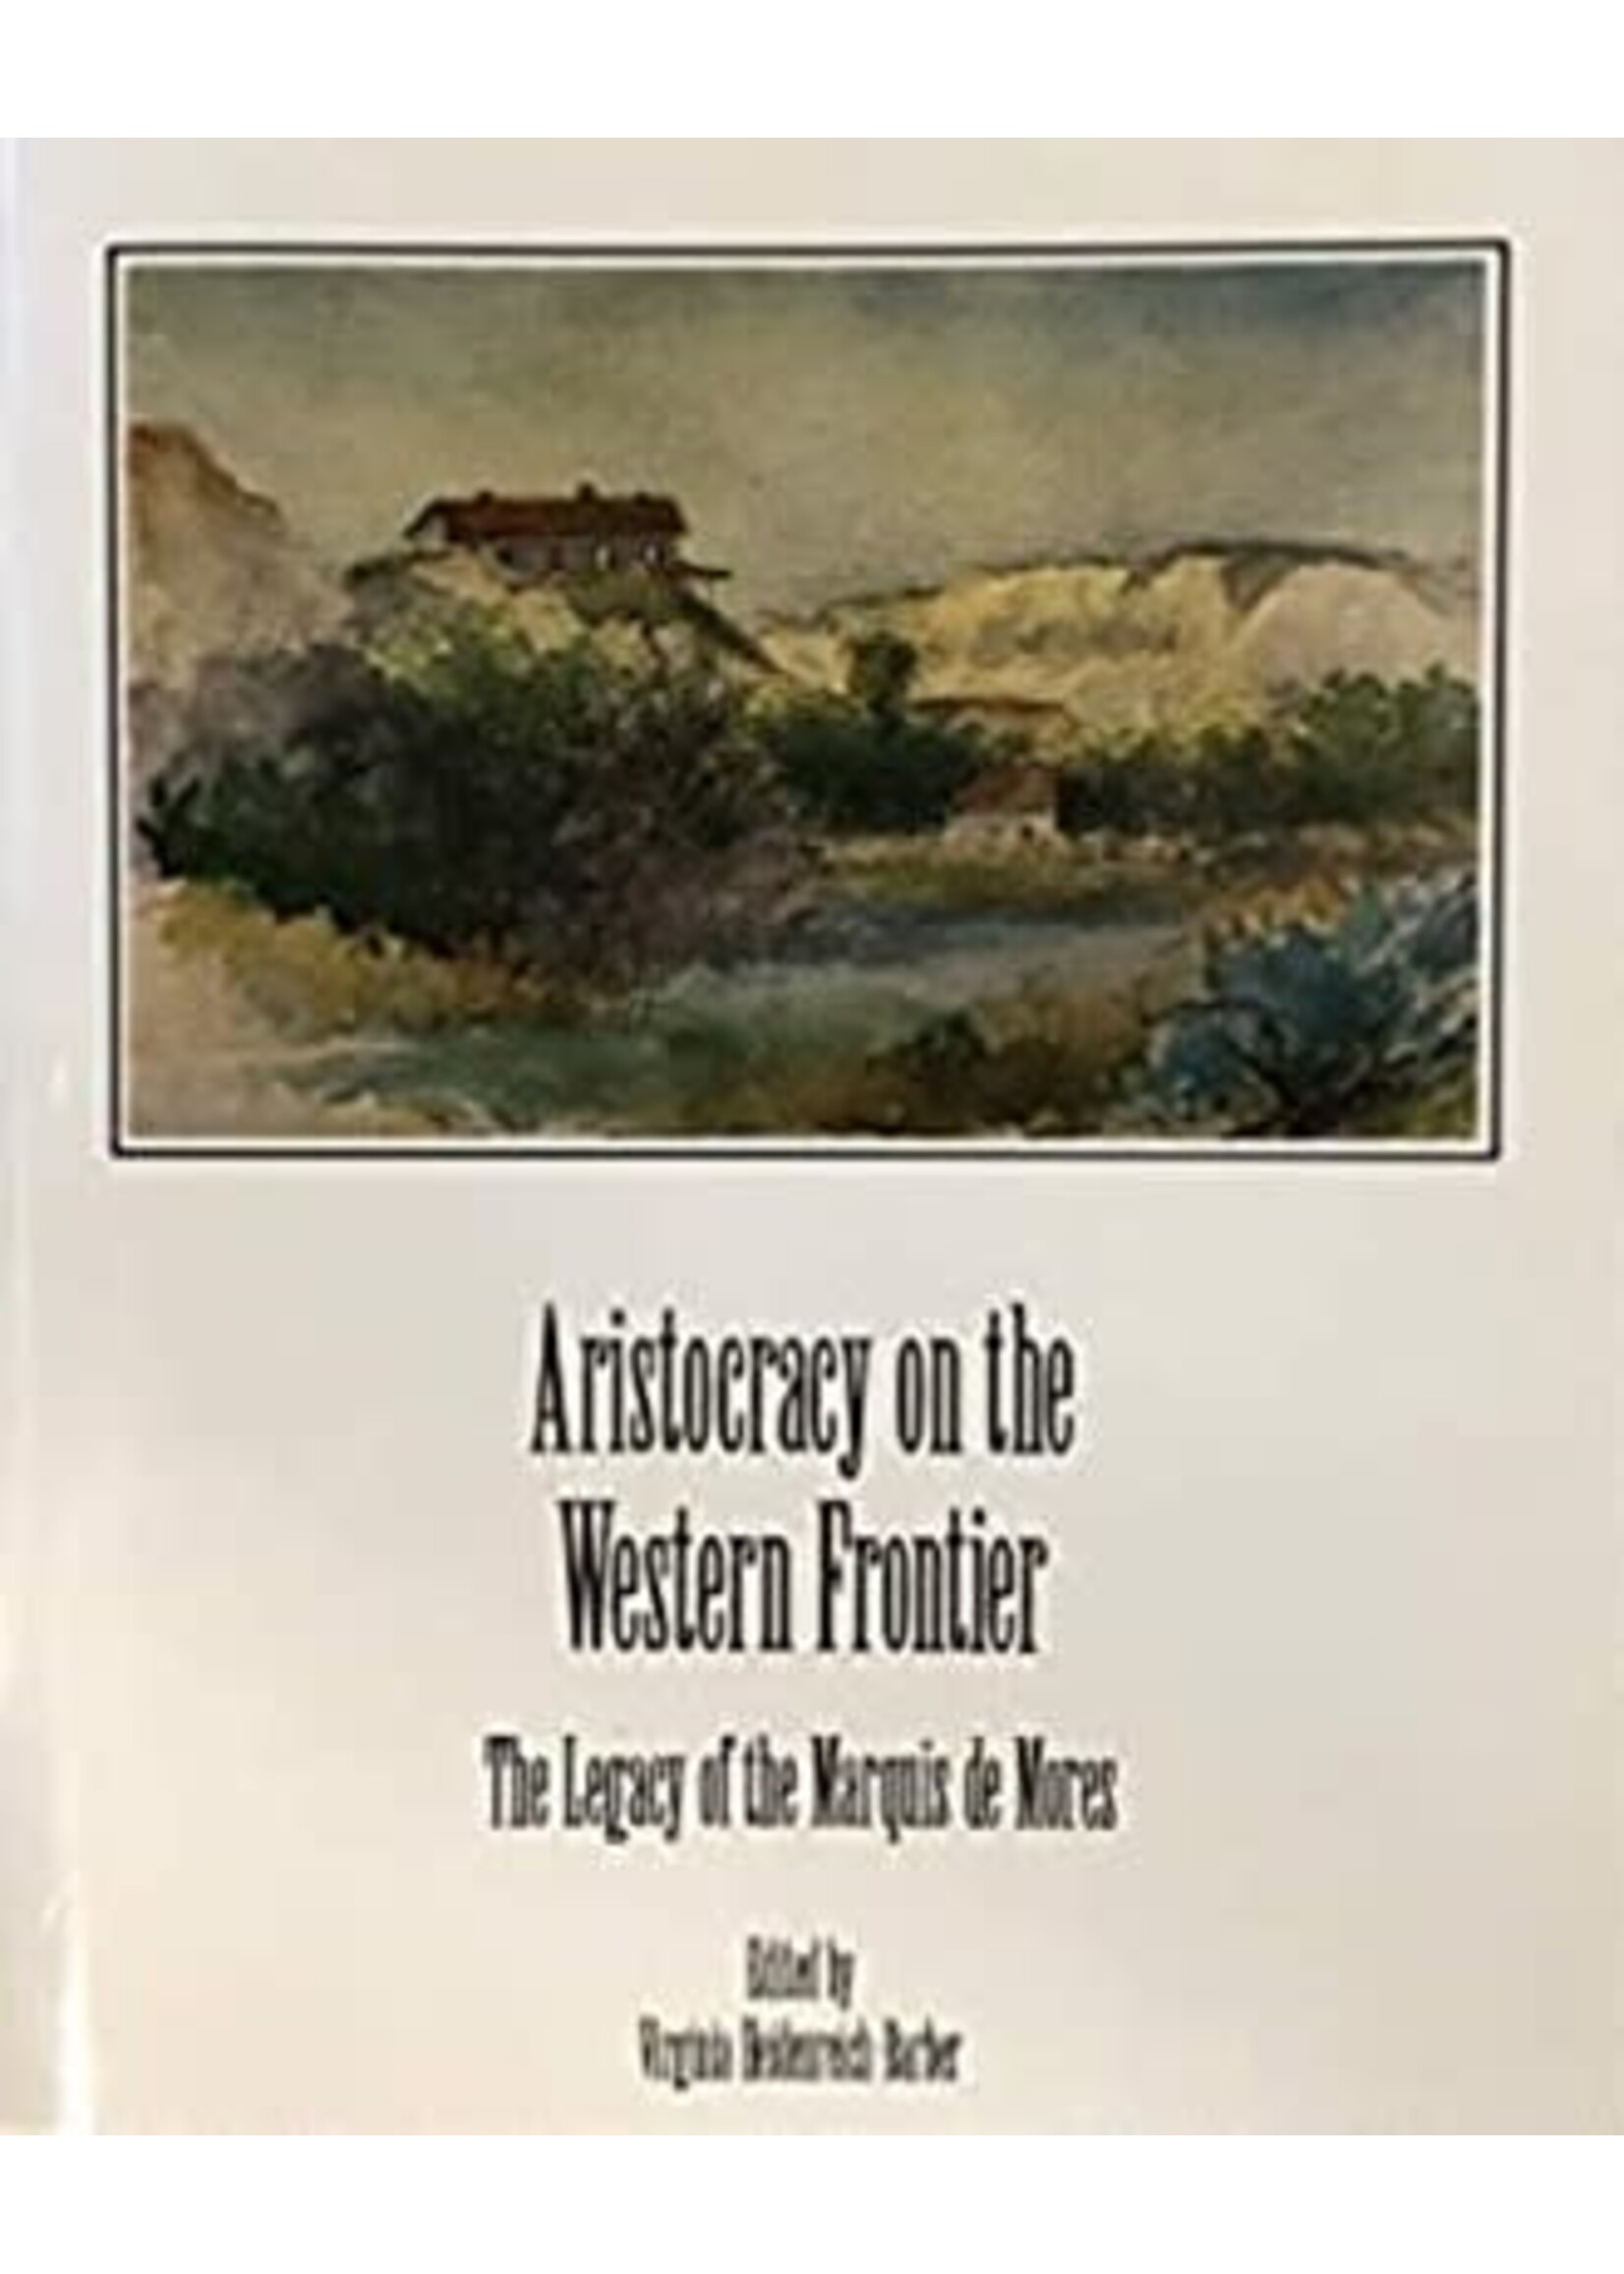 Aristocracy on the Western Frontier: The Legacy of the Marquis de Mores